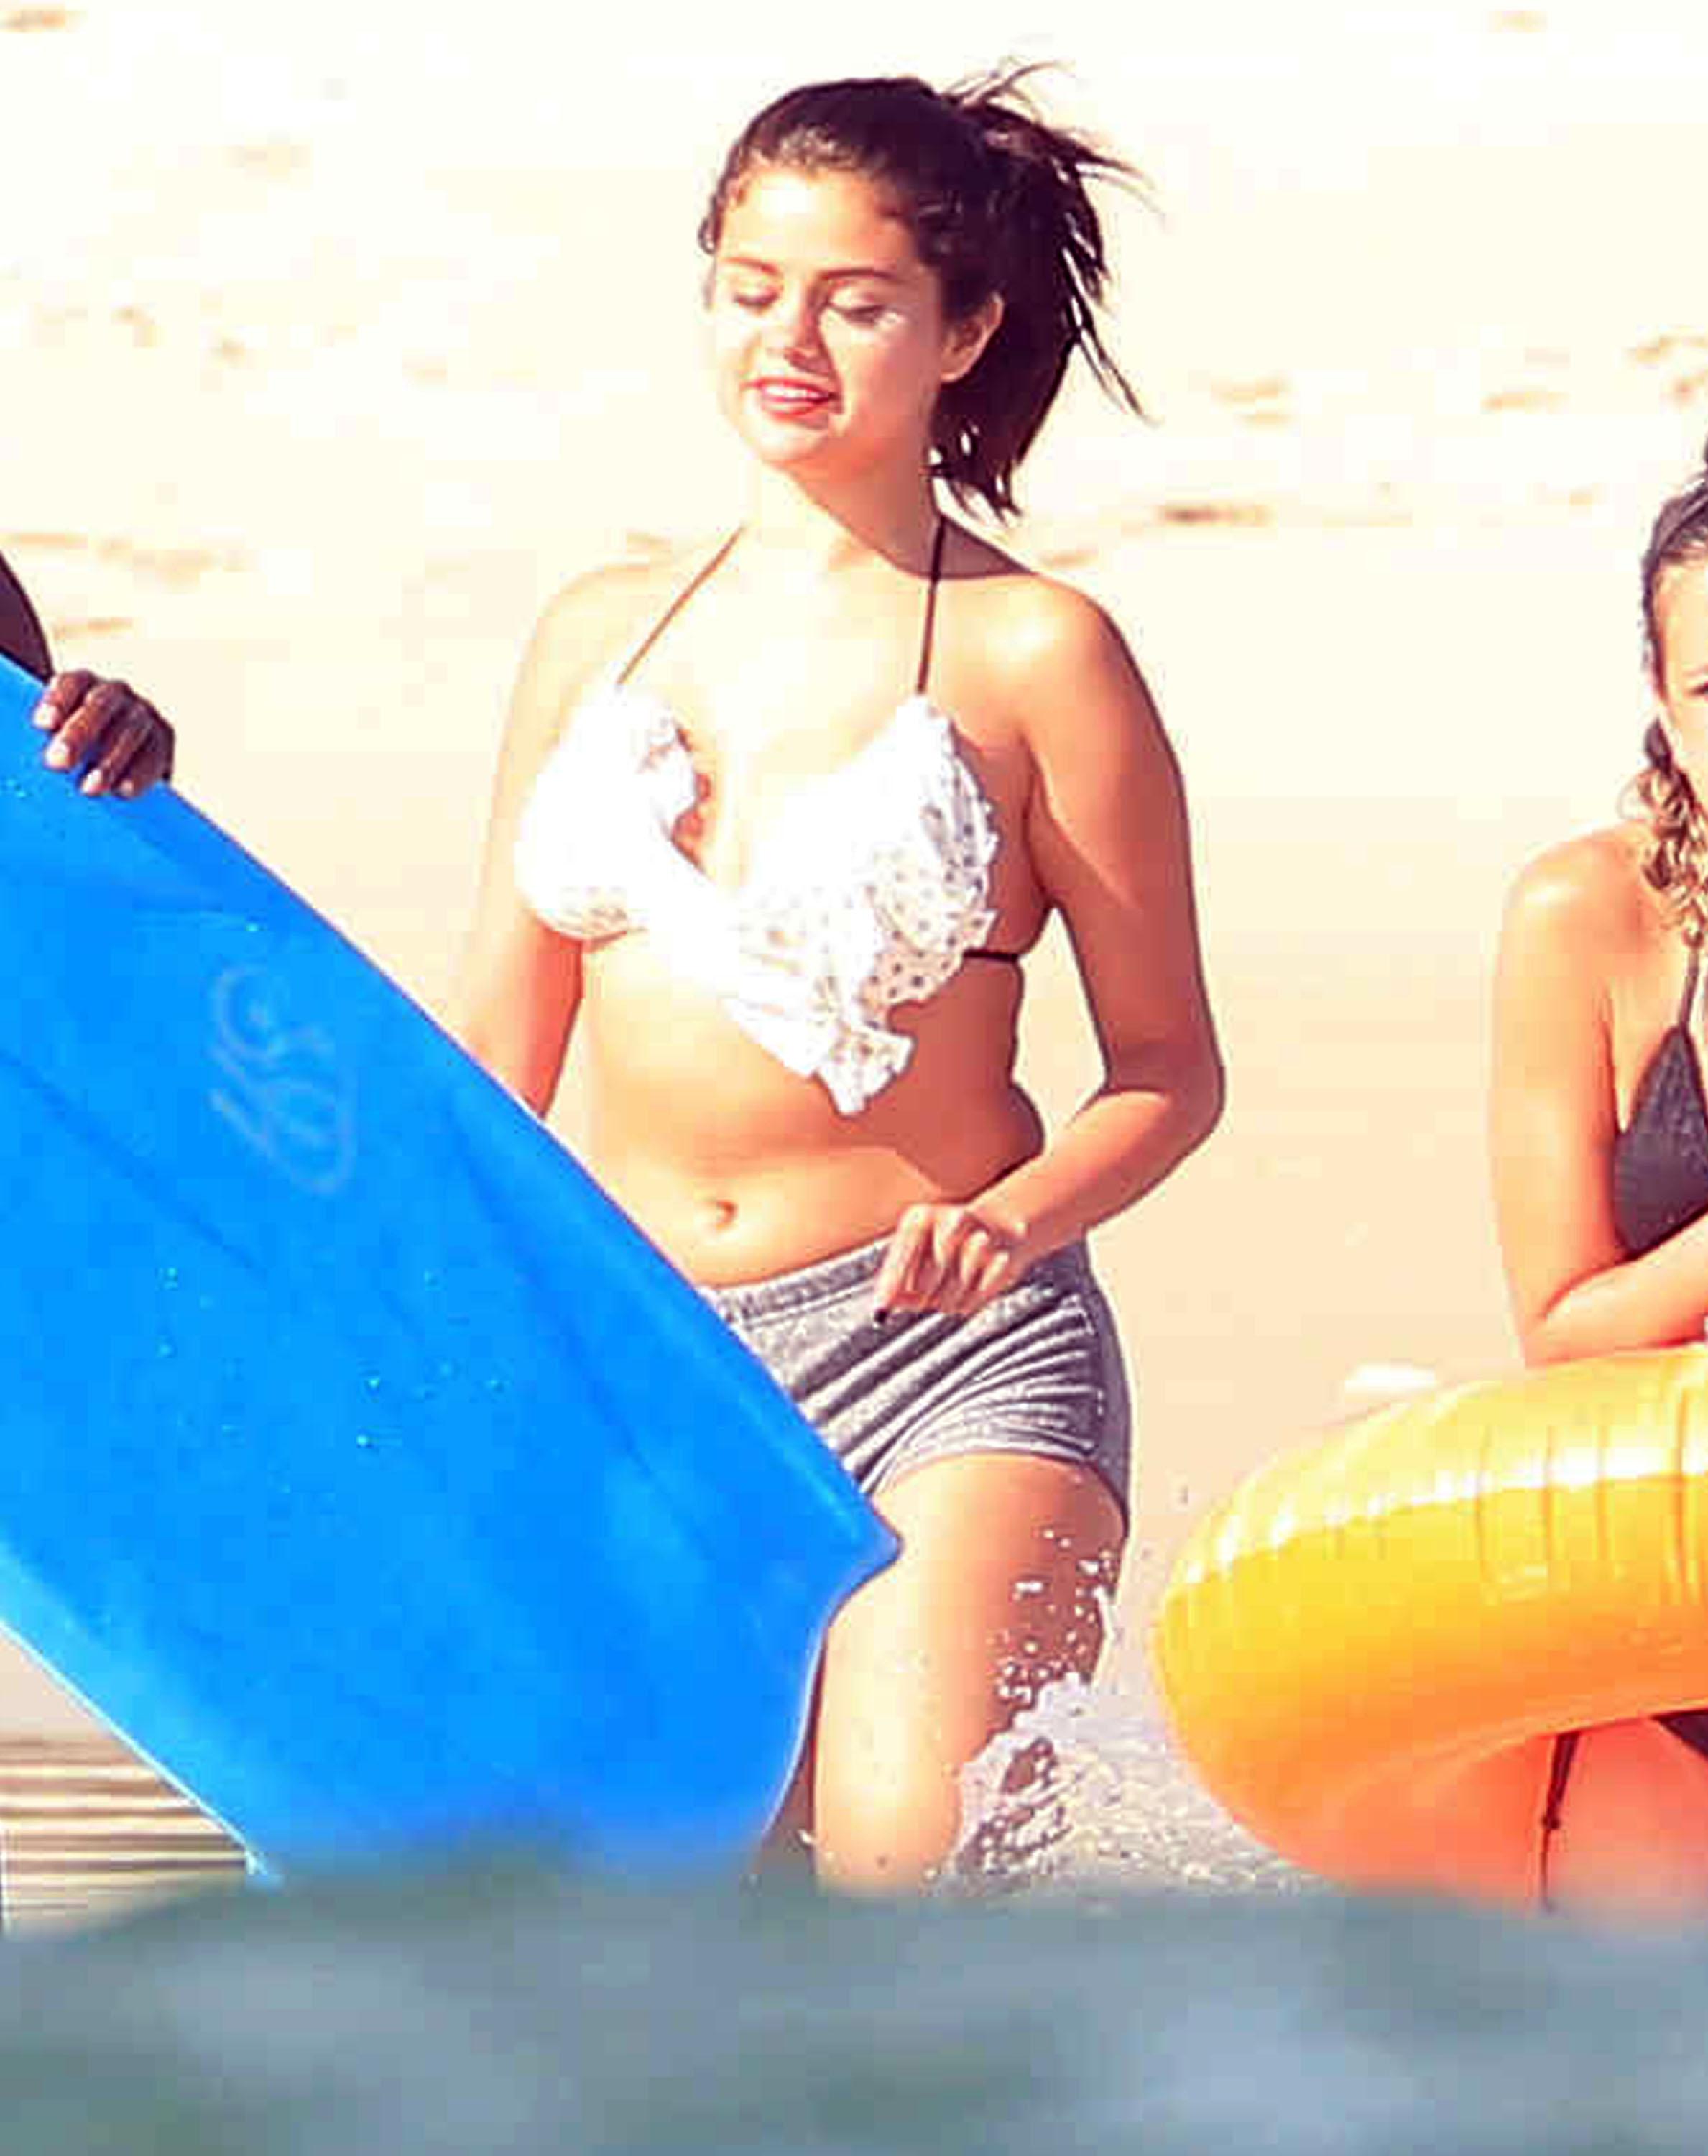 **USA ONLY** *EXCLUSIVE* Selena Gomez Hits The Beach With Friends In Mexico  **MUST CALL FOR PRICING**